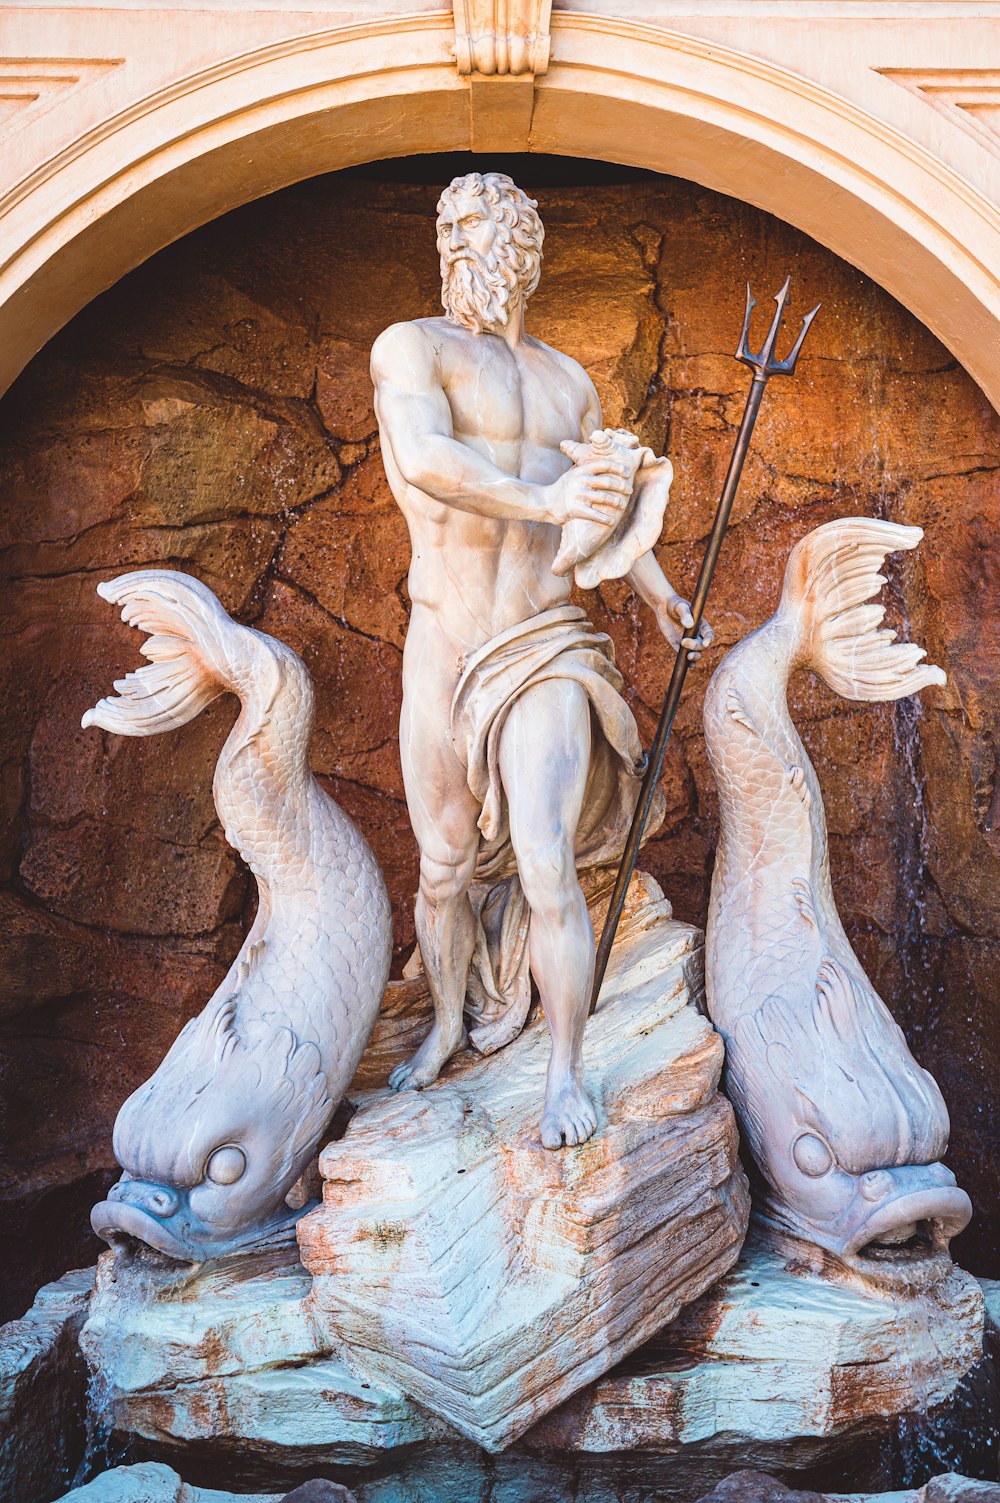 a statue of a man with a spear and two seagulls